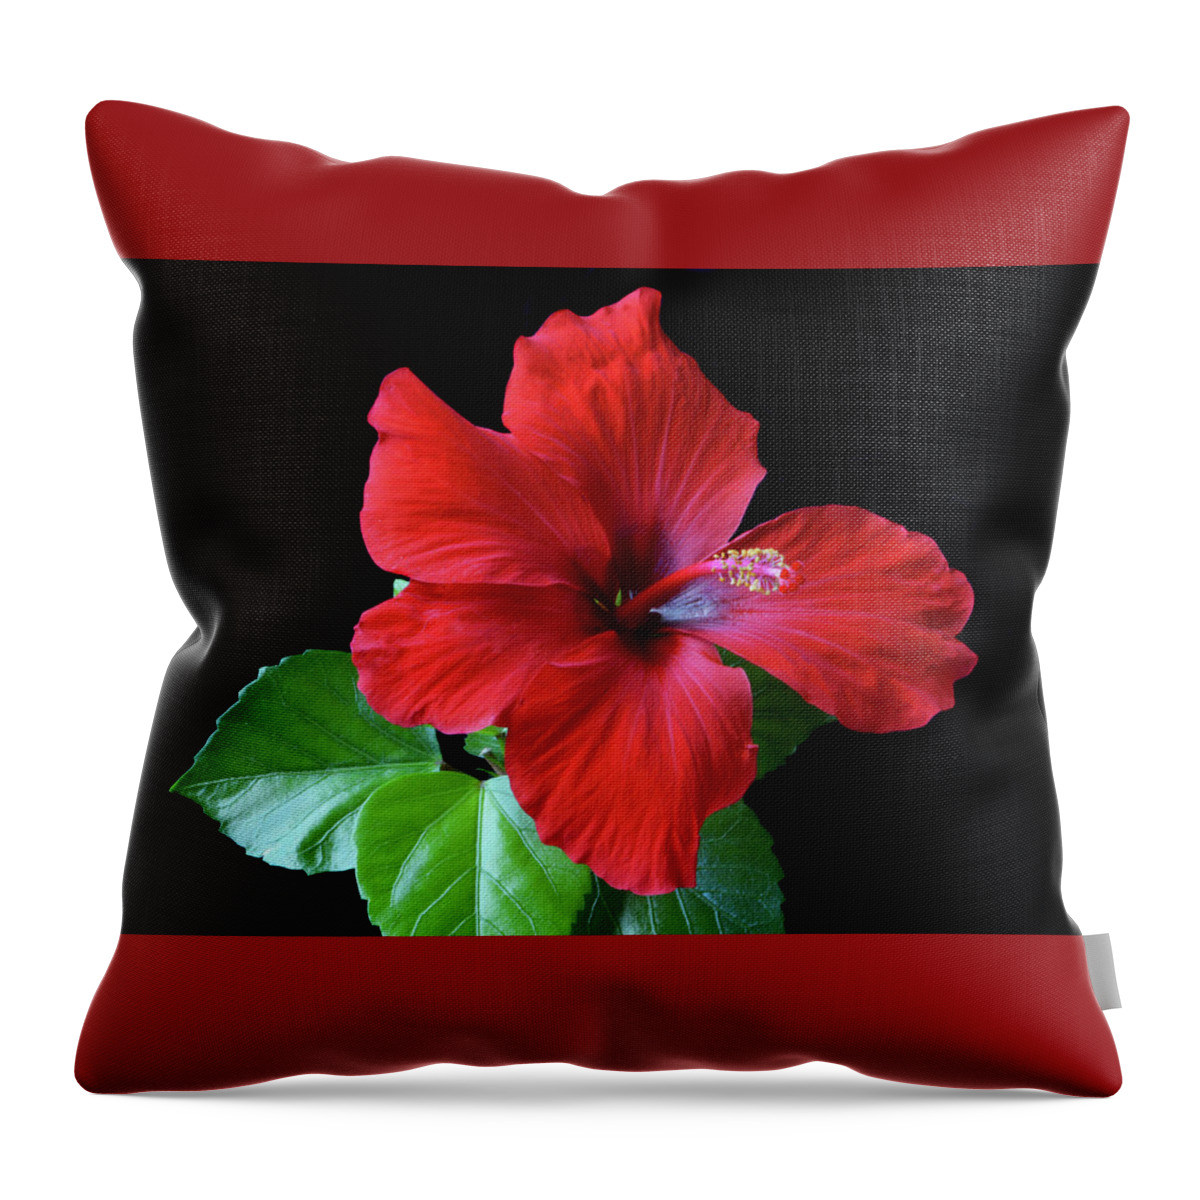 Hibiscus Throw Pillow featuring the photograph Red Hibiscus Portrait by Terence Davis